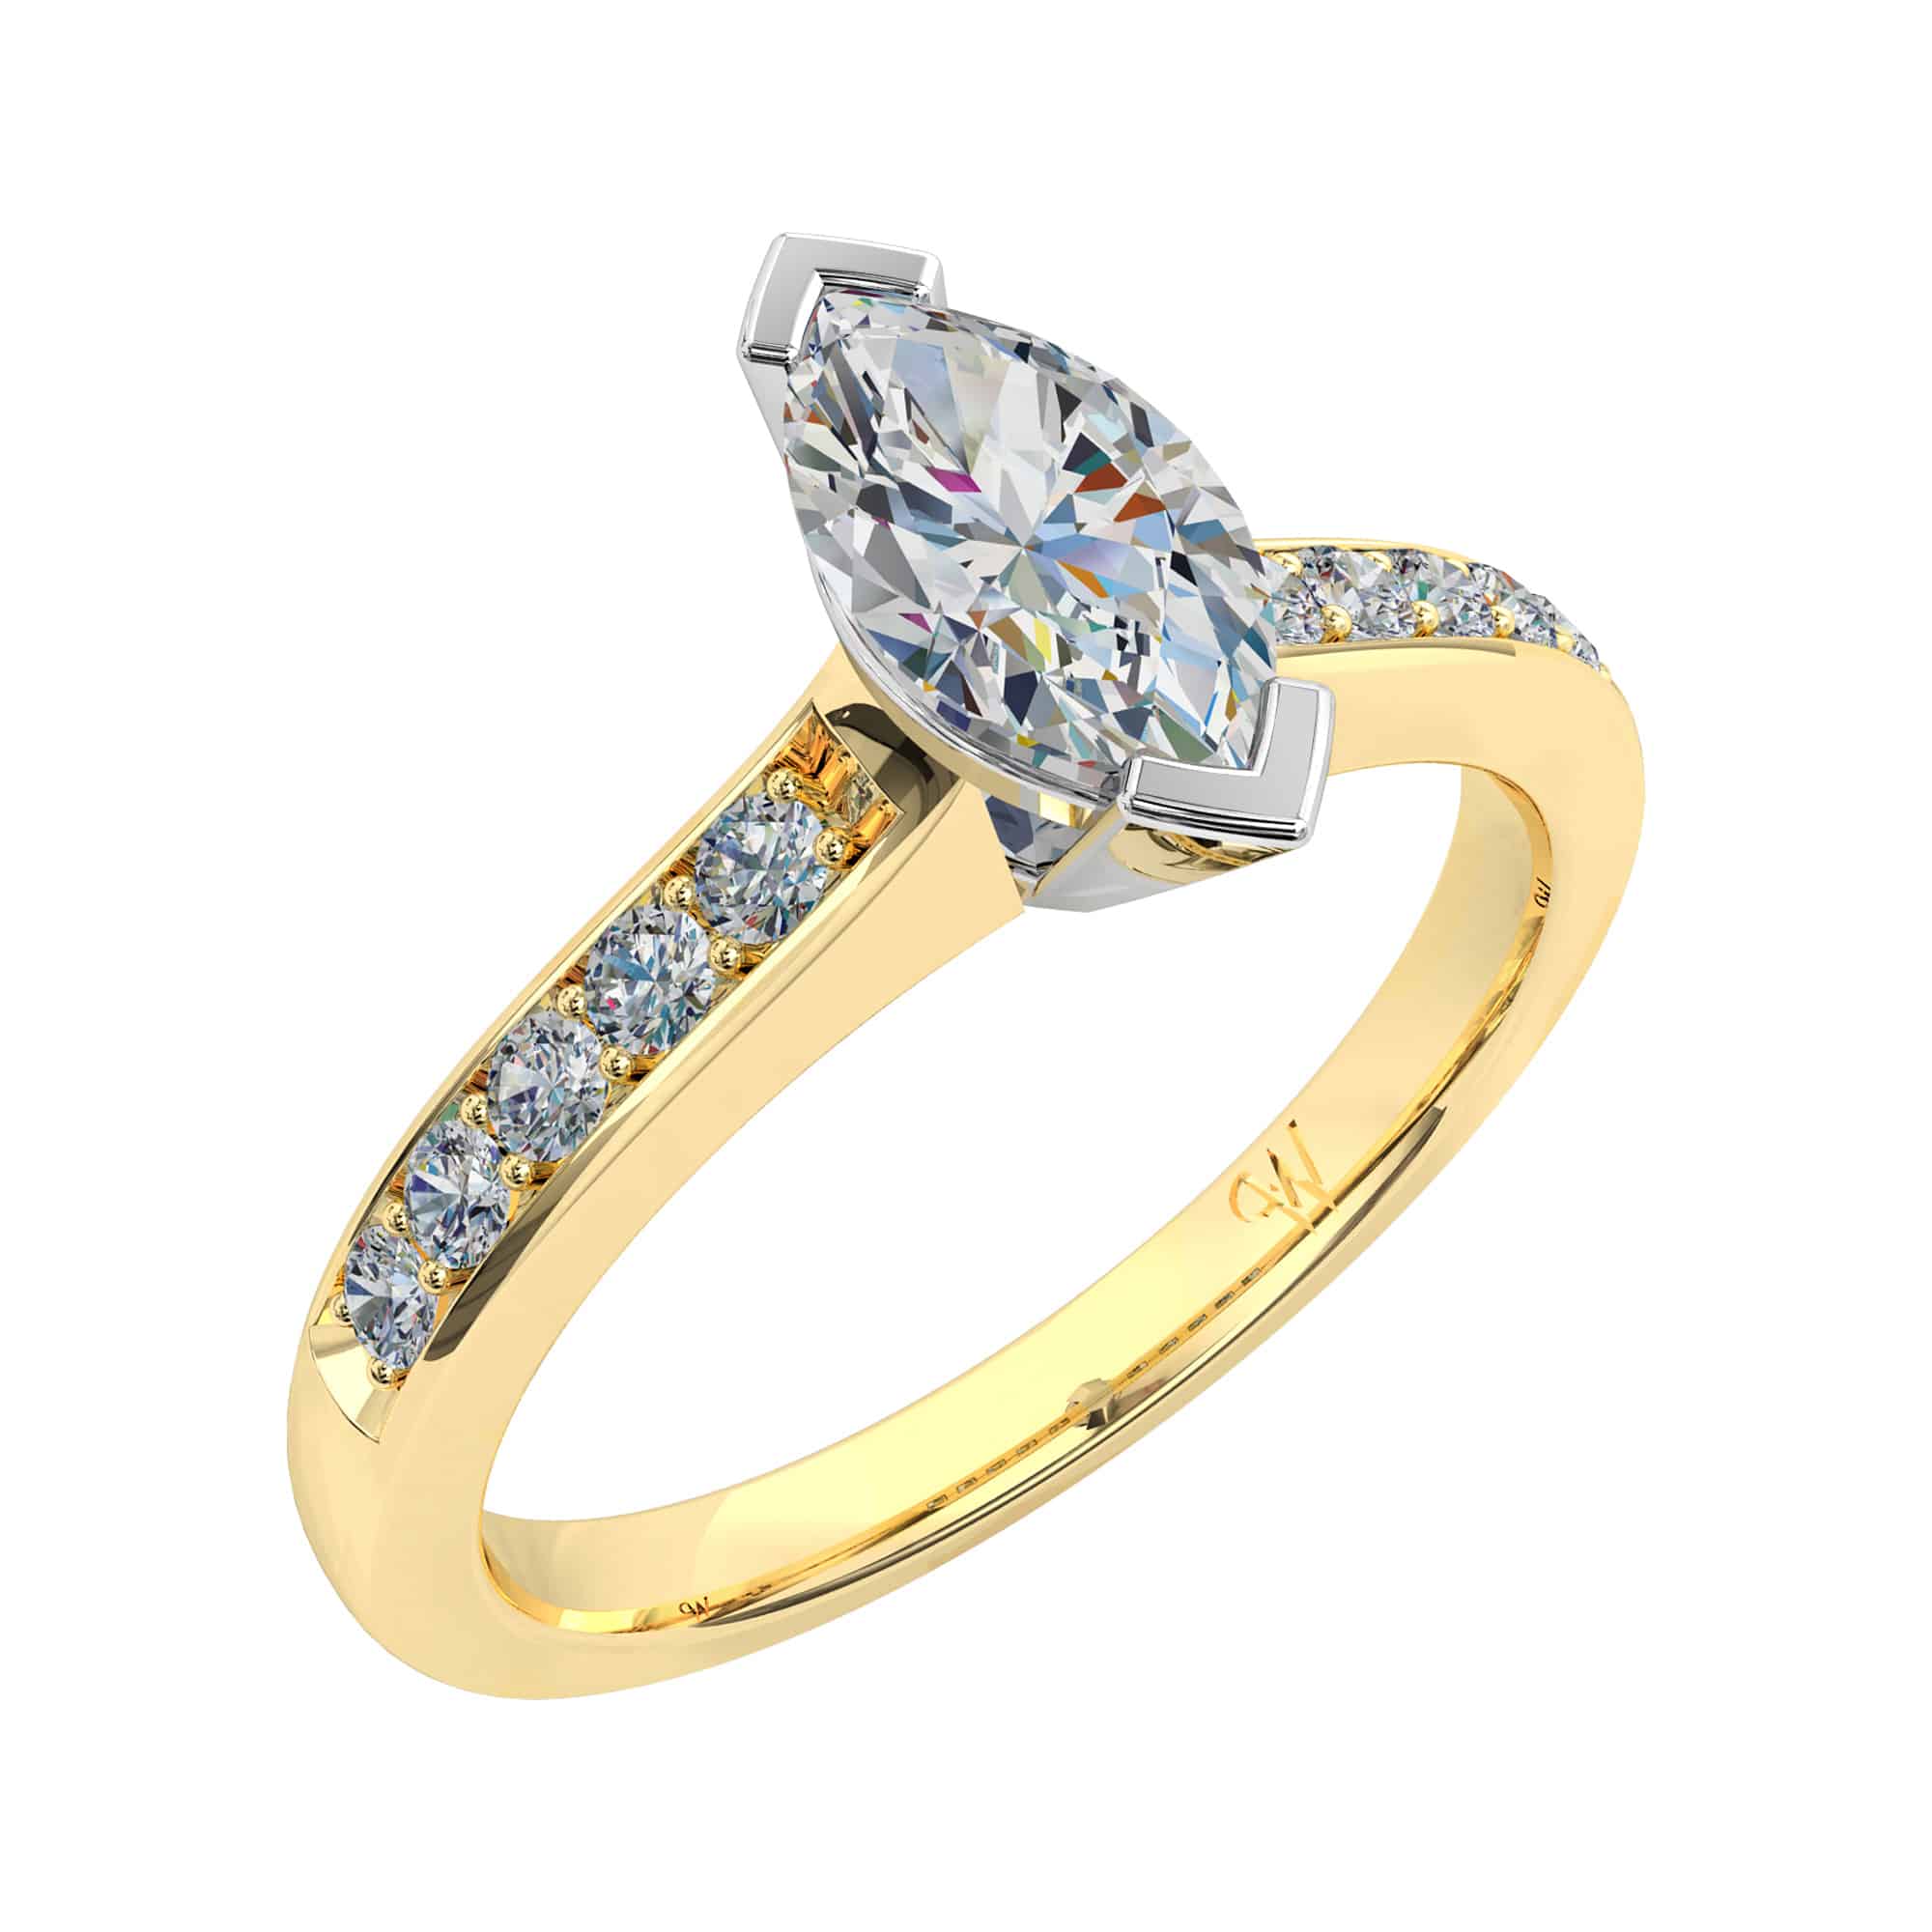 Marquise Cut Diamond Solitaire Engagement Ring